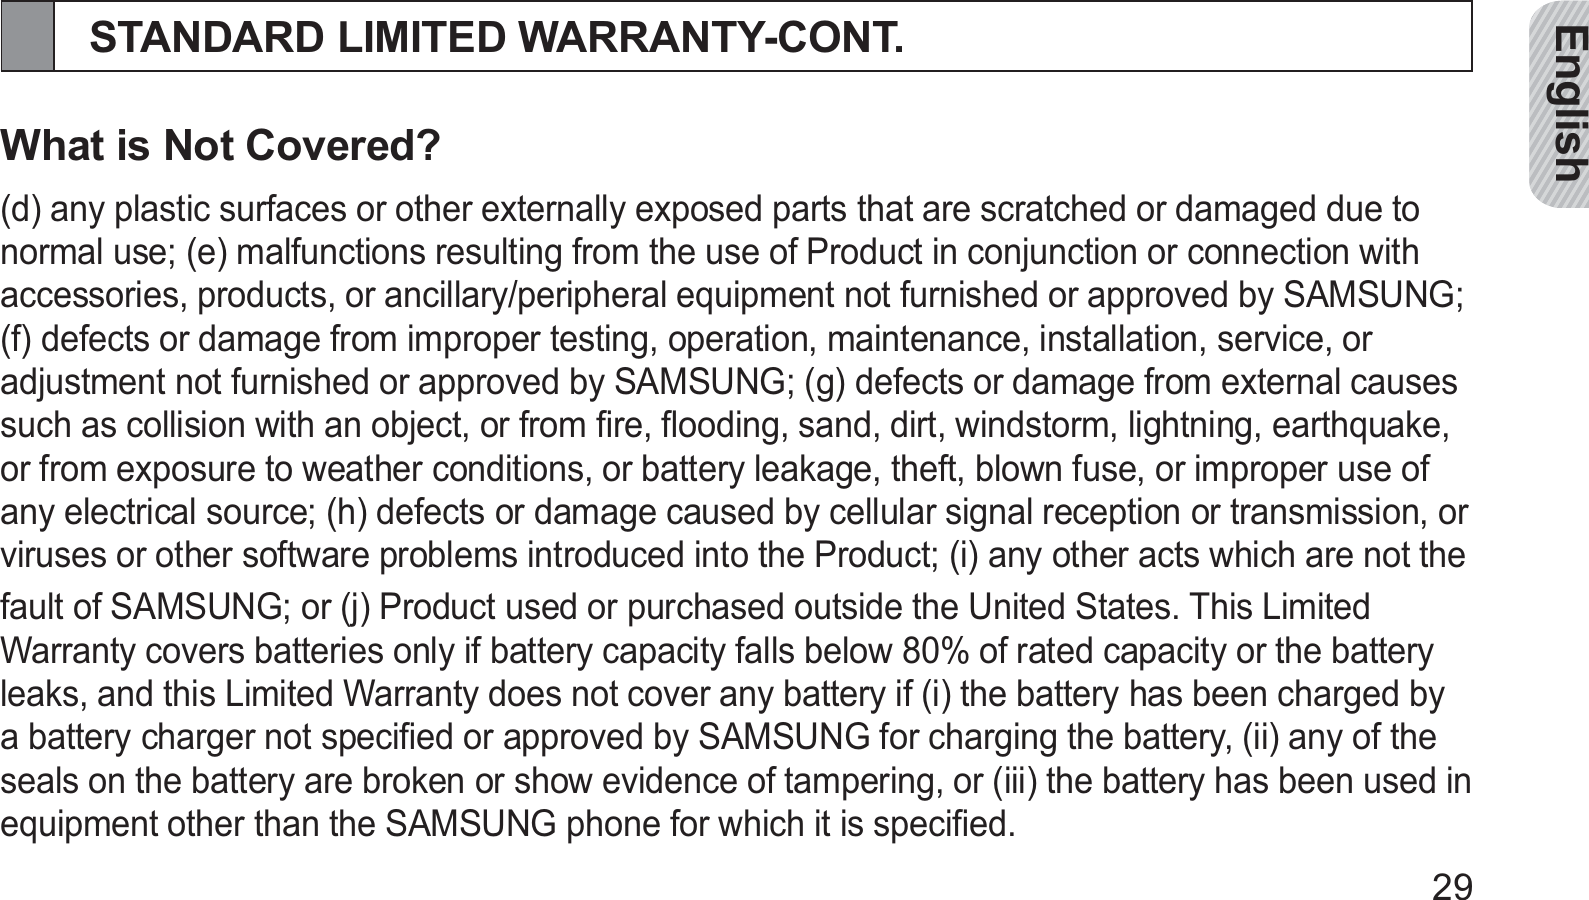 English29STANDARD LIMITED WARRANTY-CONT.What is Not Covered?(d) any plastic surfaces or other externally exposed parts that are scratched or damaged due to normal use; (e) malfunctions resulting from the use of Product in conjunction or connection with accessories, products, or ancillary/peripheral equipment not furnished or approved by SAMSUNG; (f) defects or damage from improper testing, operation, maintenance, installation, service, or adjustment not furnished or approved by SAMSUNG; (g) defects or damage from external causes such as collision with an object, or from ﬁre, ﬂooding, sand, dirt, windstorm, lightning, earthquake, or from exposure to weather conditions, or battery leakage, theft, blown fuse, or improper use of any electrical source; (h) defects or damage caused by cellular signal reception or transmission, or viruses or other software problems introduced into the Product; (i) any other acts which are not thefault of SAMSUNG; or (j) Product used or purchased outside the United States. This Limited Warranty covers batteries only if battery capacity falls below 80% of rated capacity or the battery leaks, and this Limited Warranty does not cover any battery if (i) the battery has been charged by a battery charger not speciﬁed or approved by SAMSUNG for charging the battery, (ii) any of the seals on the battery are broken or show evidence of tampering, or (iii) the battery has been used in equipment other than the SAMSUNG phone for which it is speciﬁed.